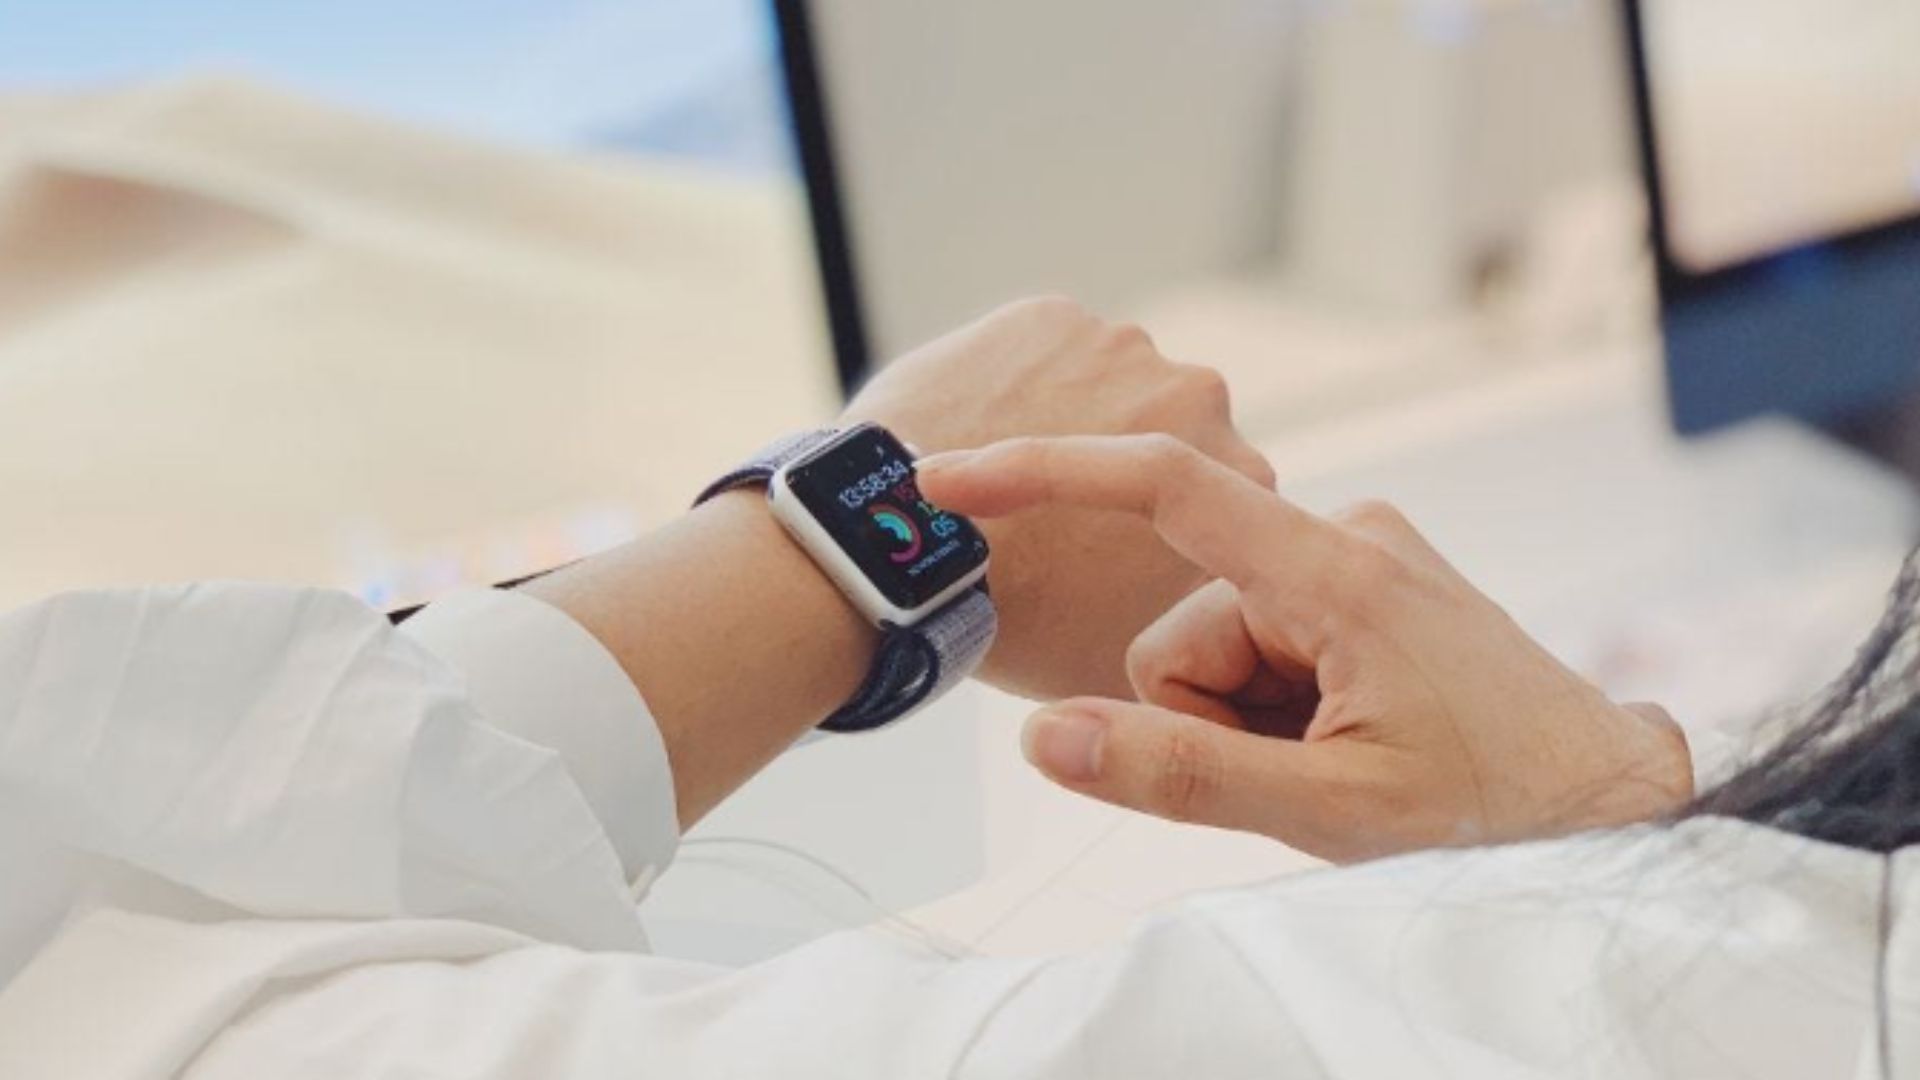 wearable technology enhancing the health sector with wearbale watches 